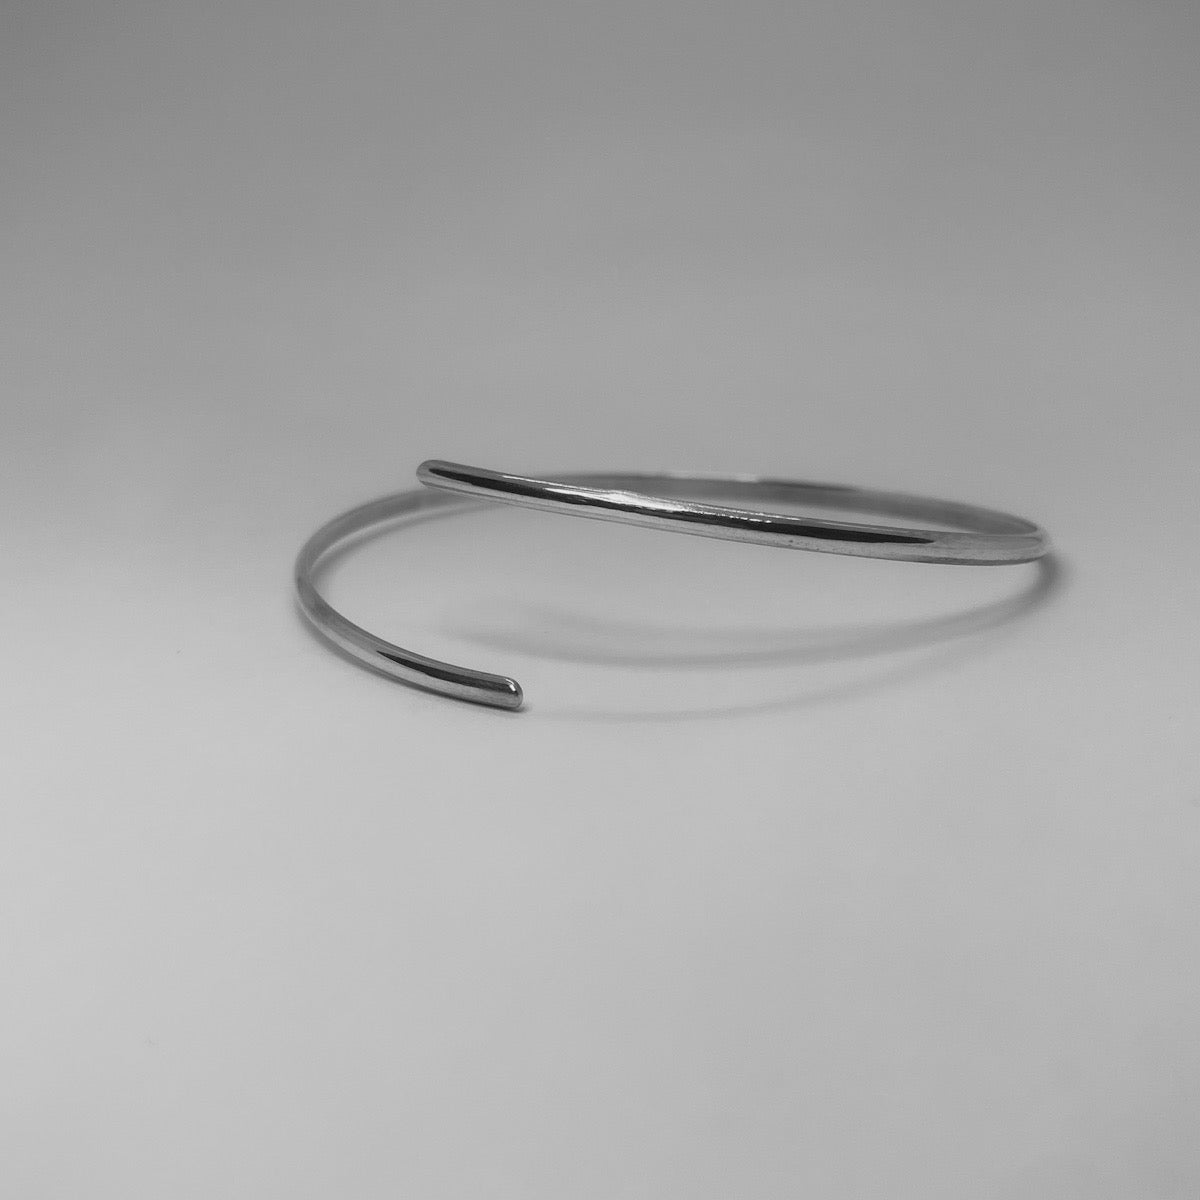 The Foot Bracelet is a handmade piece crafted from sterling silver 925. It features a slim silver band with elasticity, allowing it to be adjusted either lower or higher on the ankle. Additionally, it can be worn on the wrist. This minimal and elegant silver bracelet adds a touch of sophistication to your style.